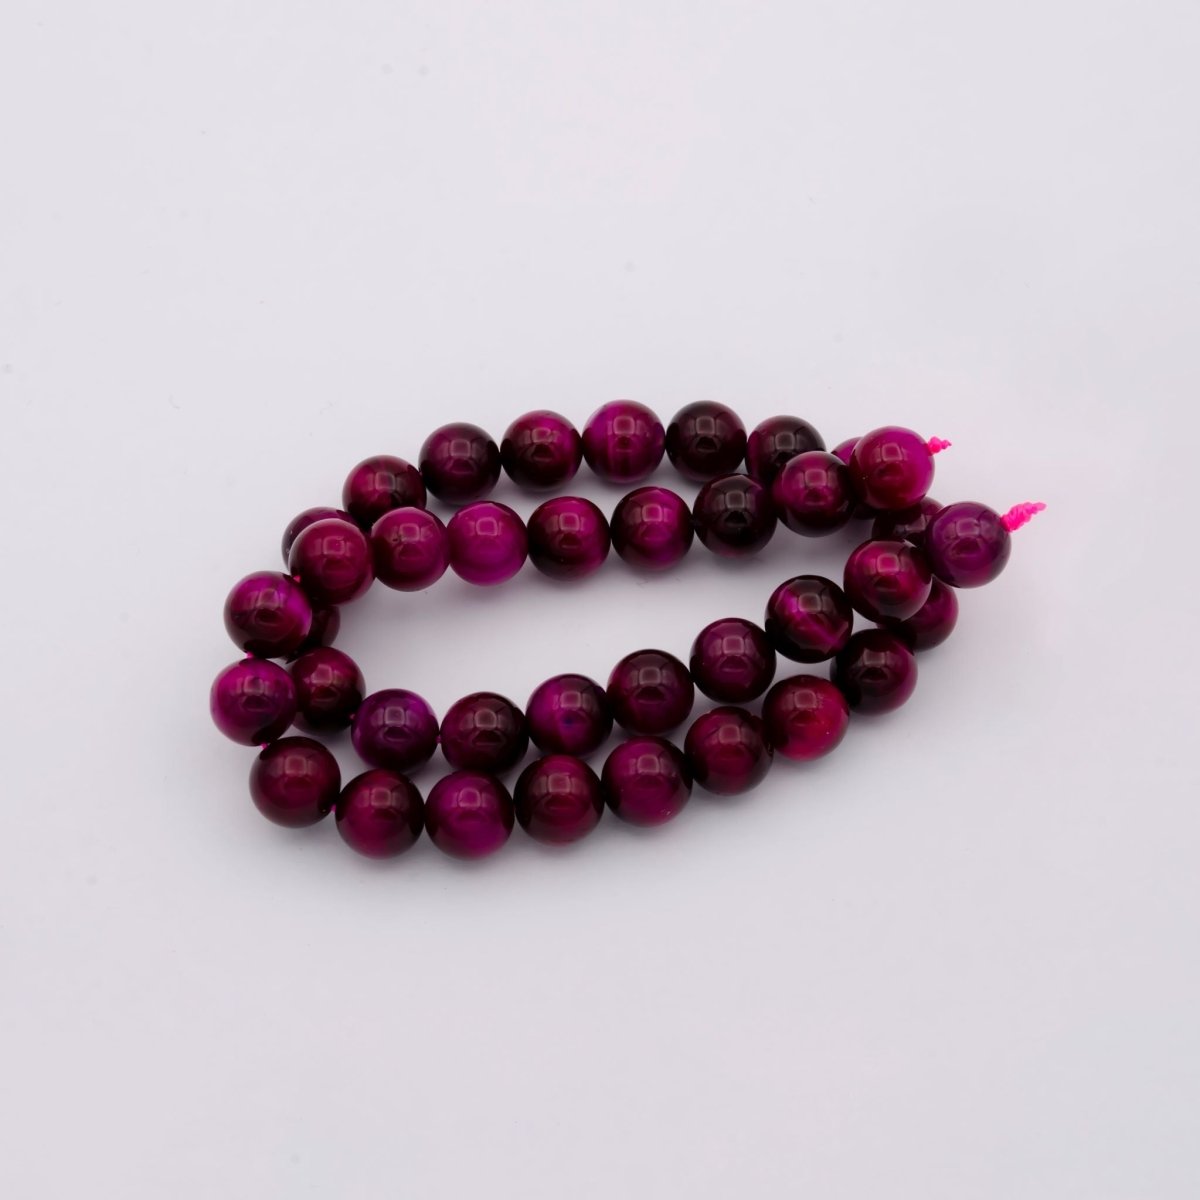 AAA Mystic Pink Tiger's Eye 8mm 10mm Smooth Round Beads 15.5" Strand Wholesale Gemstone Beads - DLUXCA